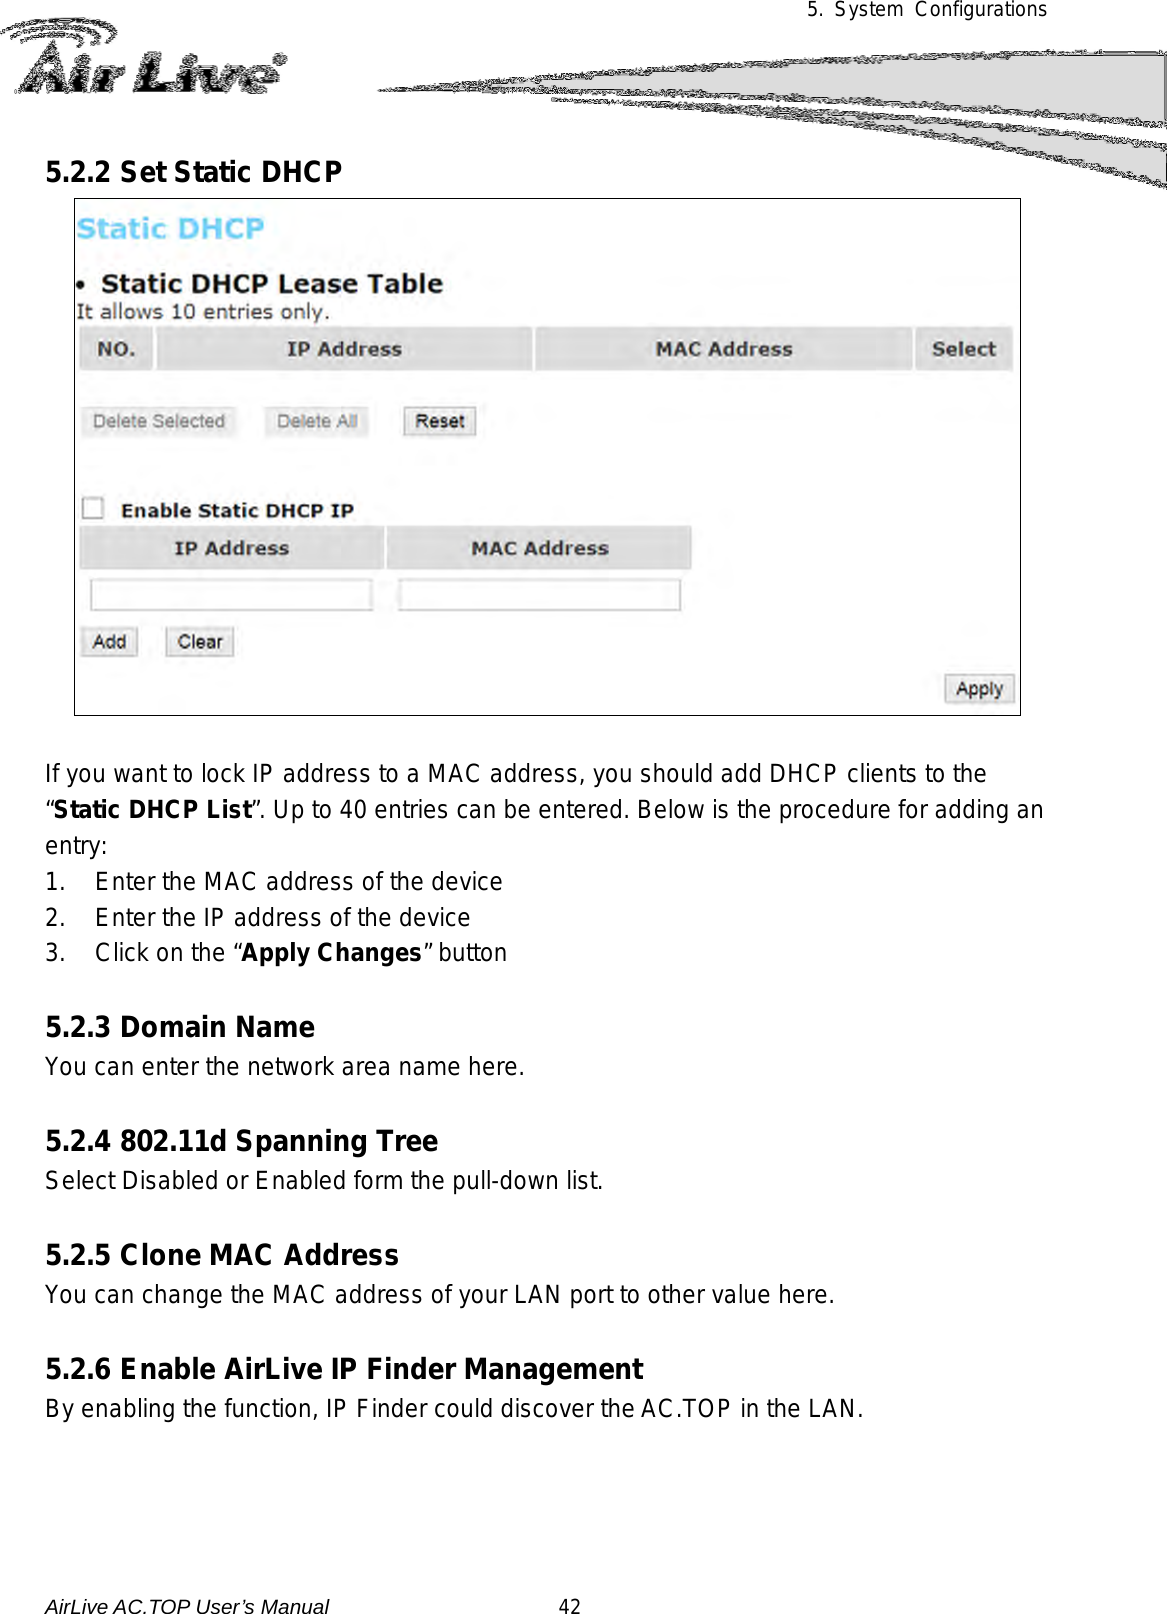 5.  System Configurations  5.2.2 Set Static DHCP   If you want to lock IP address to a MAC address, you should add DHCP clients to the “Static DHCP List”. Up to 40 entries can be entered. Below is the procedure for adding an entry: 1. Enter the MAC address of the device 2. Enter the IP address of the device 3. Click on the “Apply Changes” button  5.2.3 Domain Name You can enter the network area name here.  5.2.4 802.11d Spanning Tree Select Disabled or Enabled form the pull-down list.  5.2.5 Clone MAC Address You can change the MAC address of your LAN port to other value here.  5.2.6 Enable AirLive IP Finder Management By enabling the function, IP Finder could discover the AC.TOP in the LAN.     AirLive AC.TOP User’s Manual                      42 